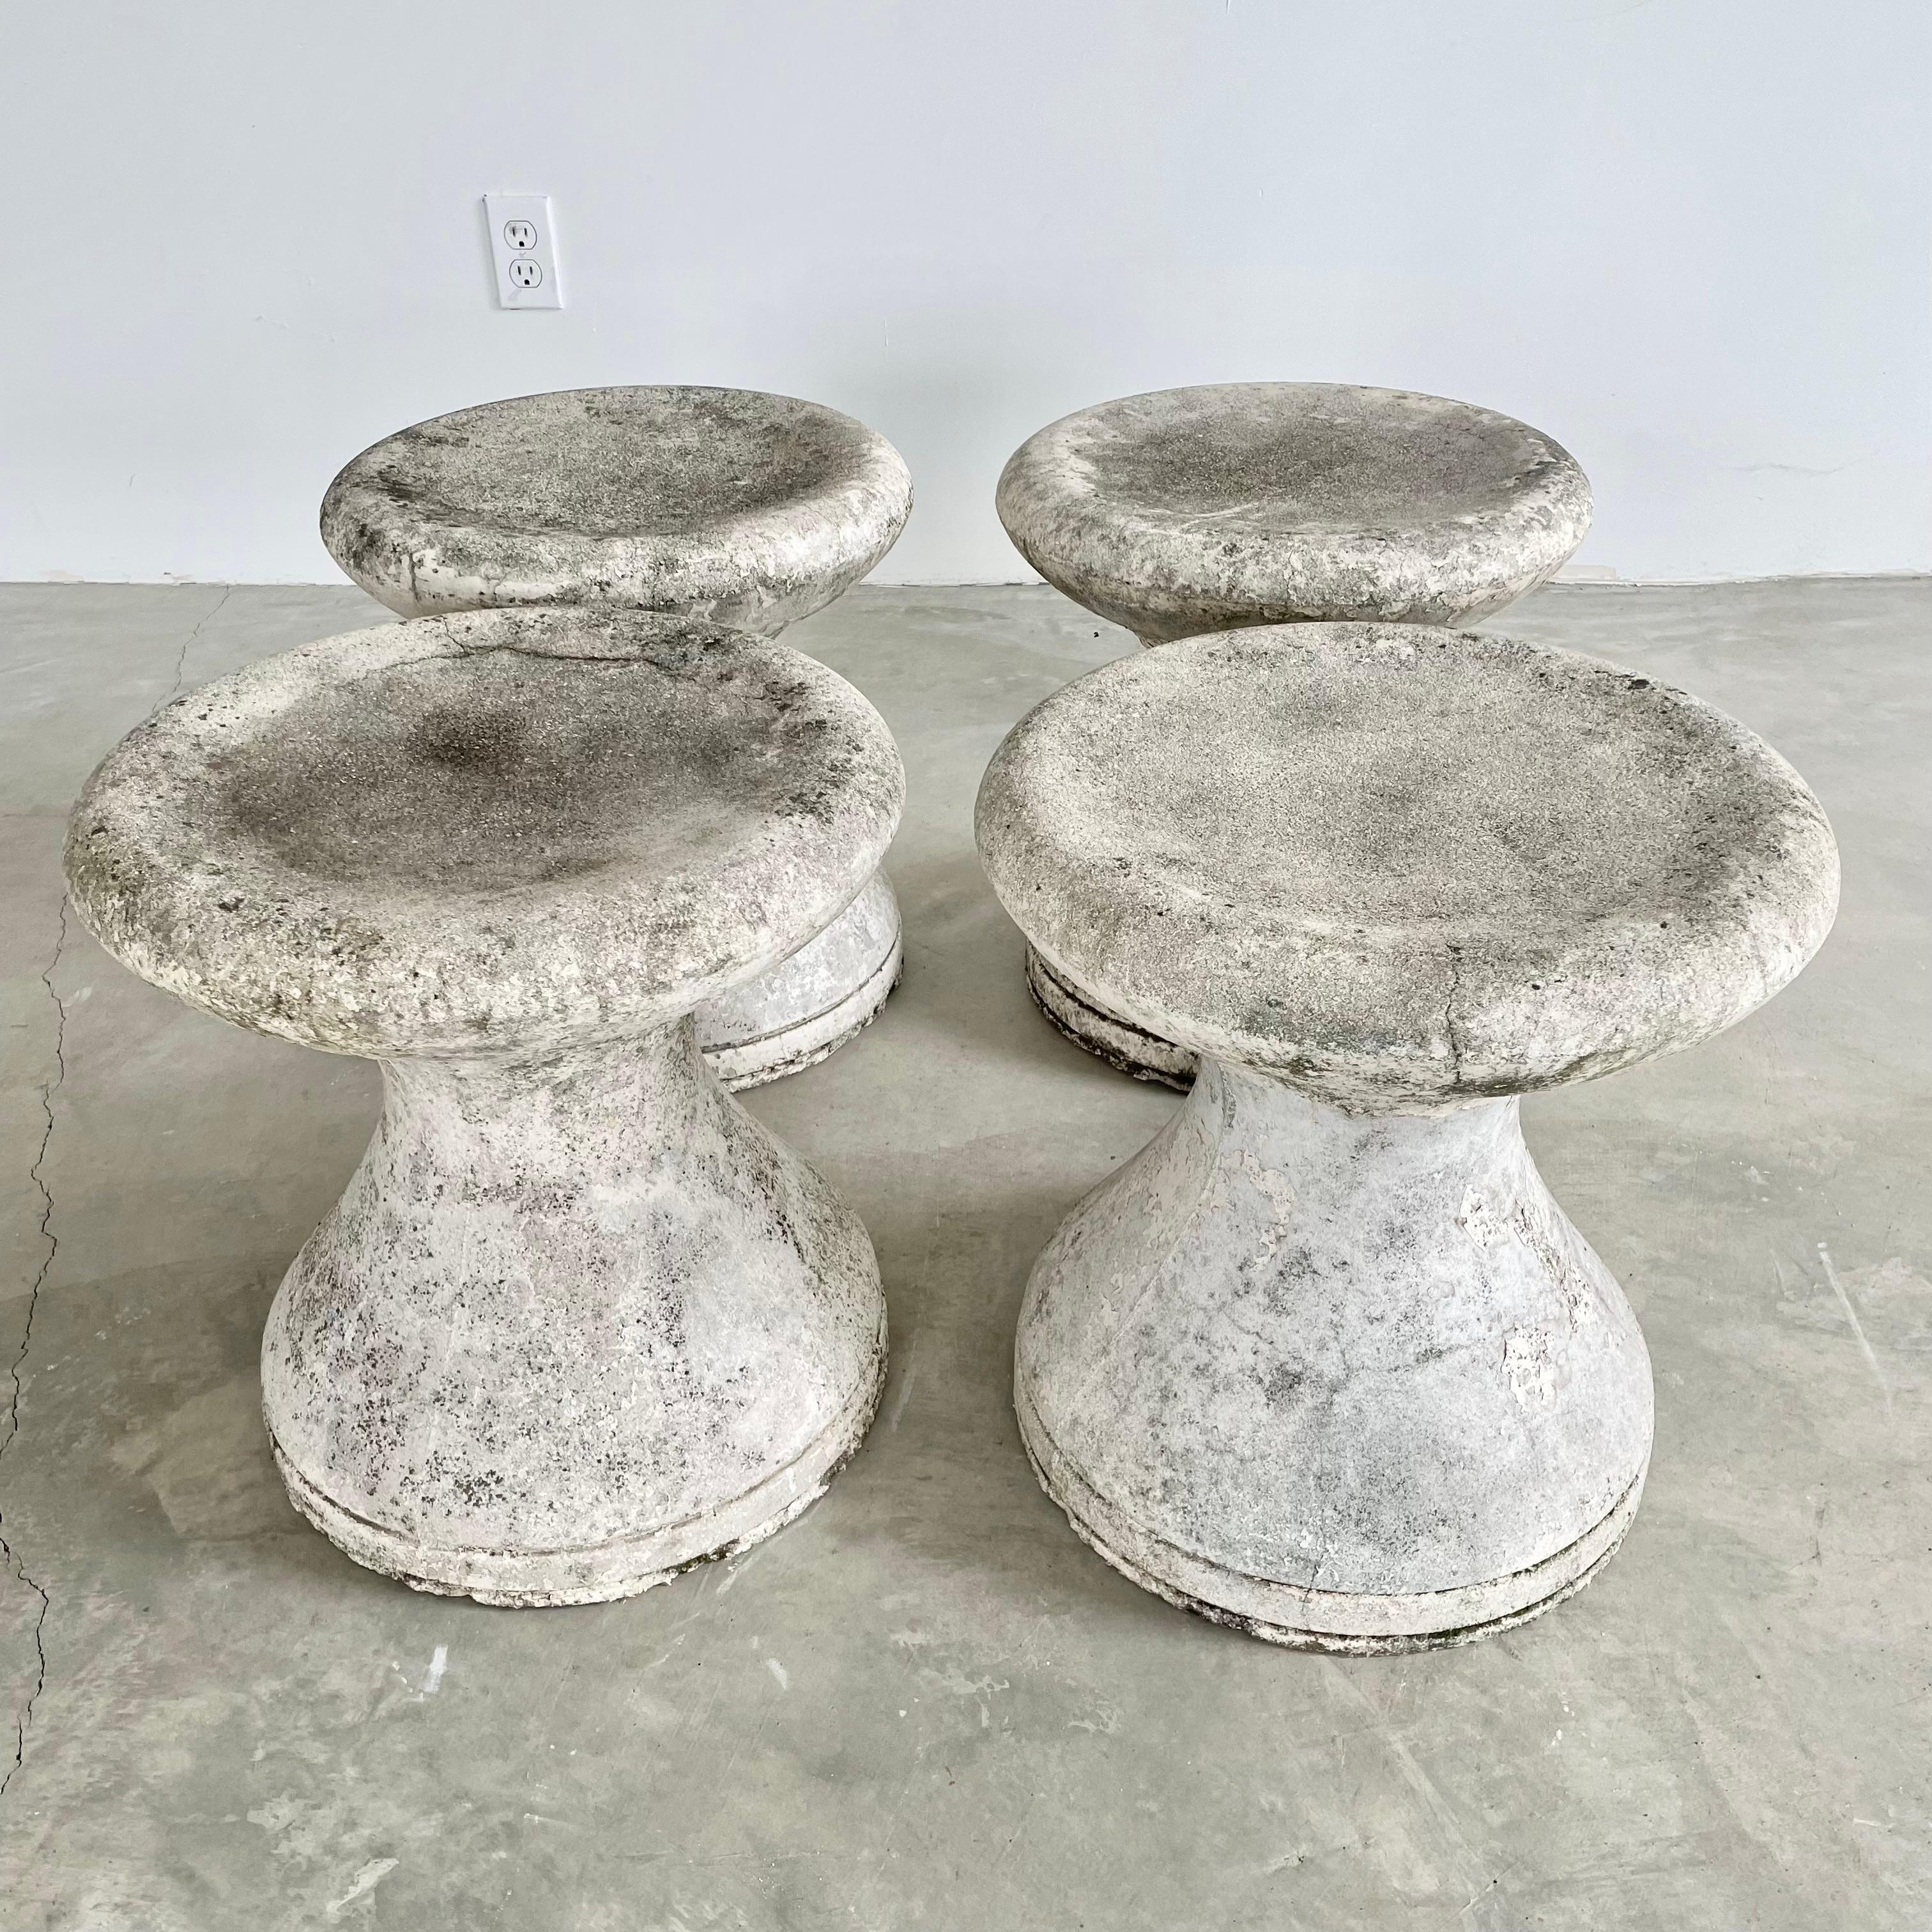 Stunning French concrete hourglass stools, circa 1970s. Minimalist design with delicate rims on the top and bottom and a concave body that expands at the seat and the base. A unique set that can easily fit into any space. Years of patina and